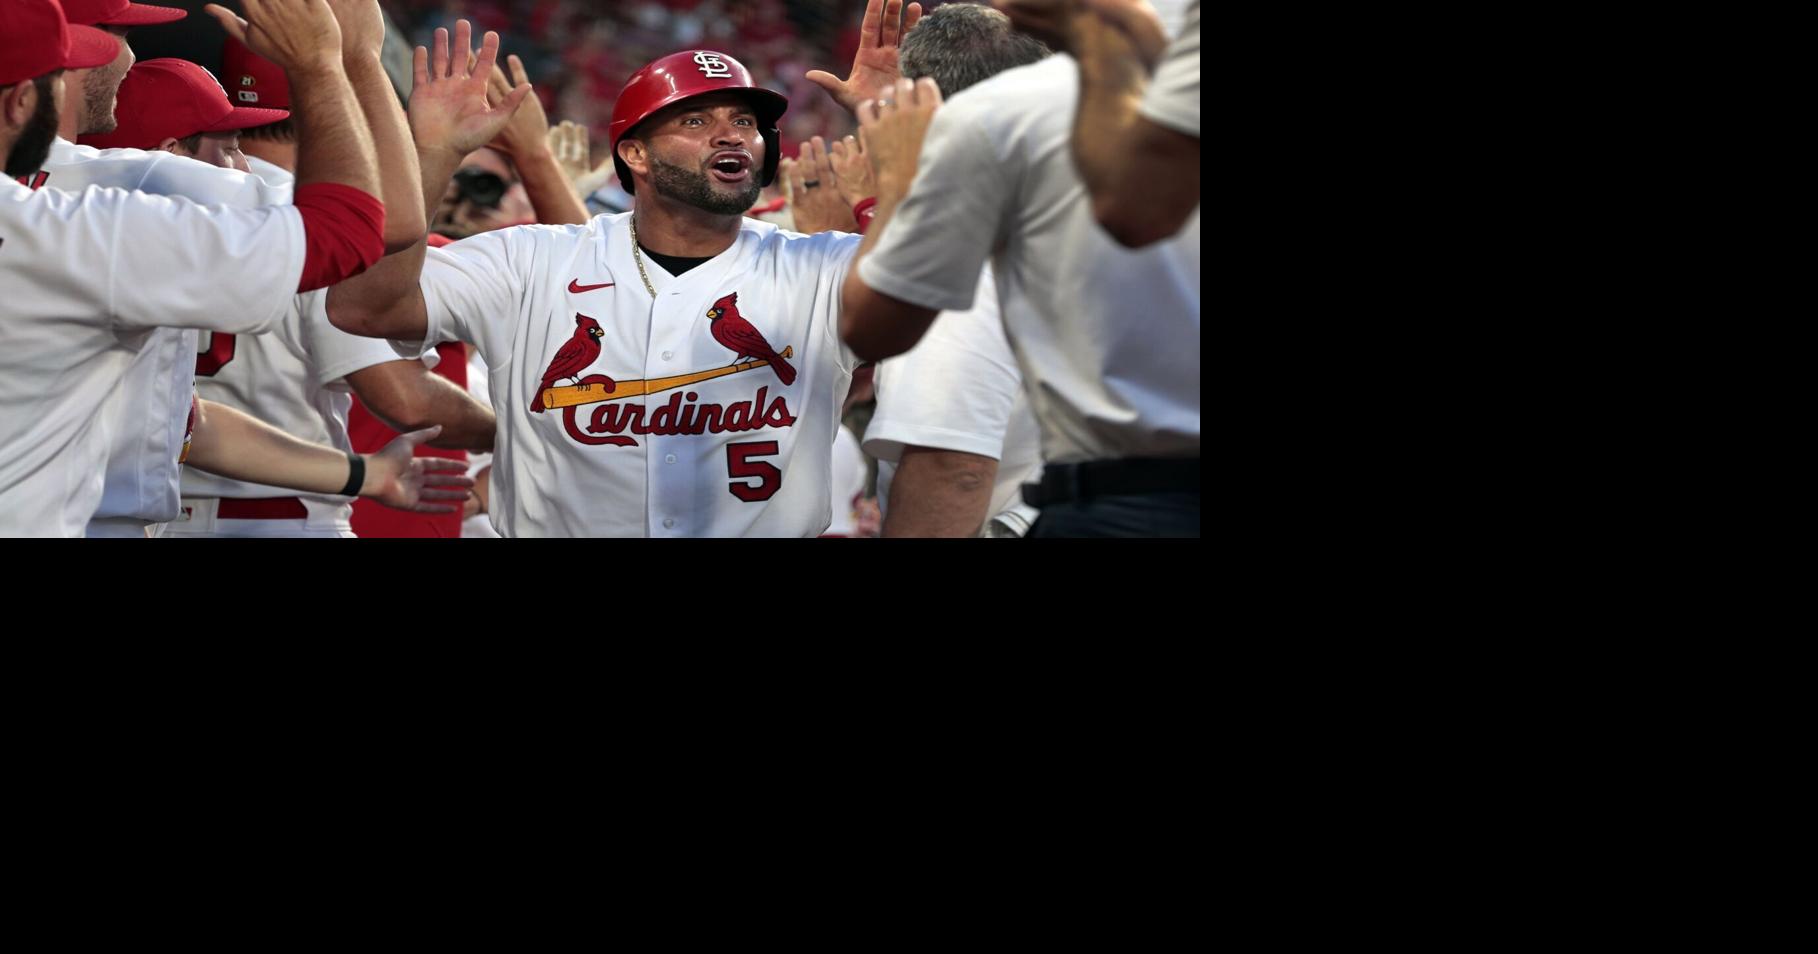 The mainstay': Yadier Molina outwitted, outworked opponents in